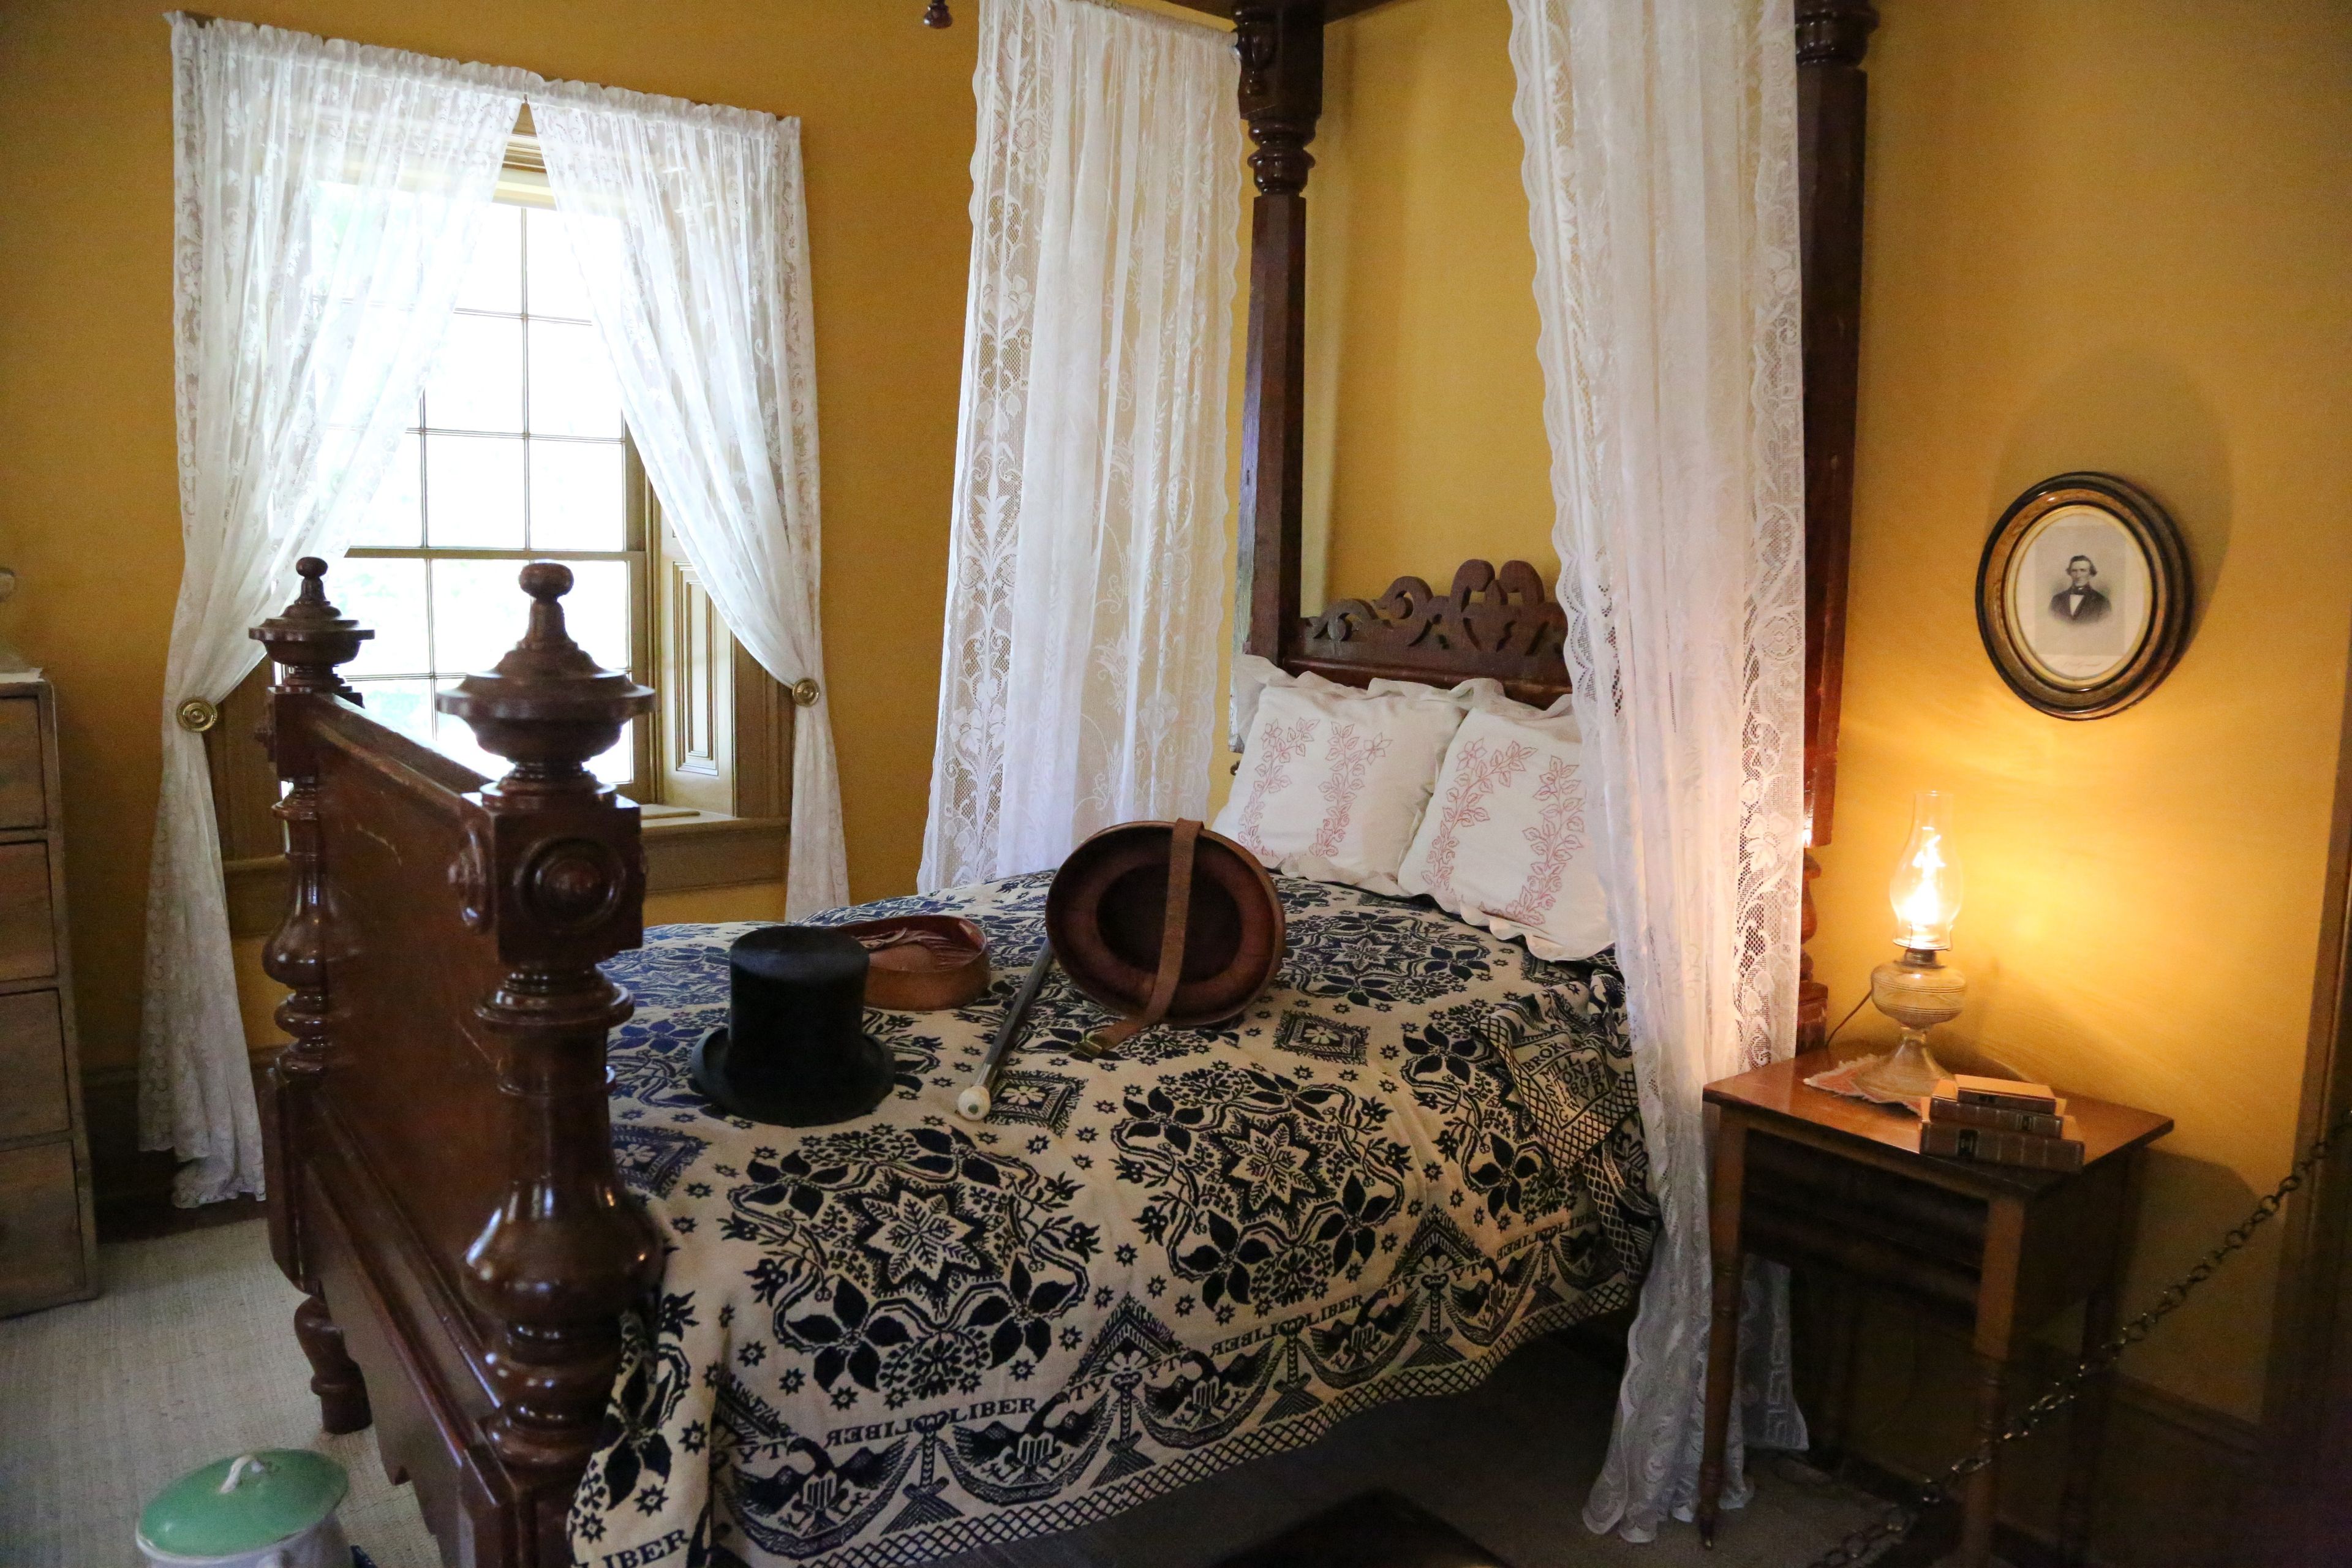 One of the bedrooms inside of the Brigham Young winter home in St. George, Utah.